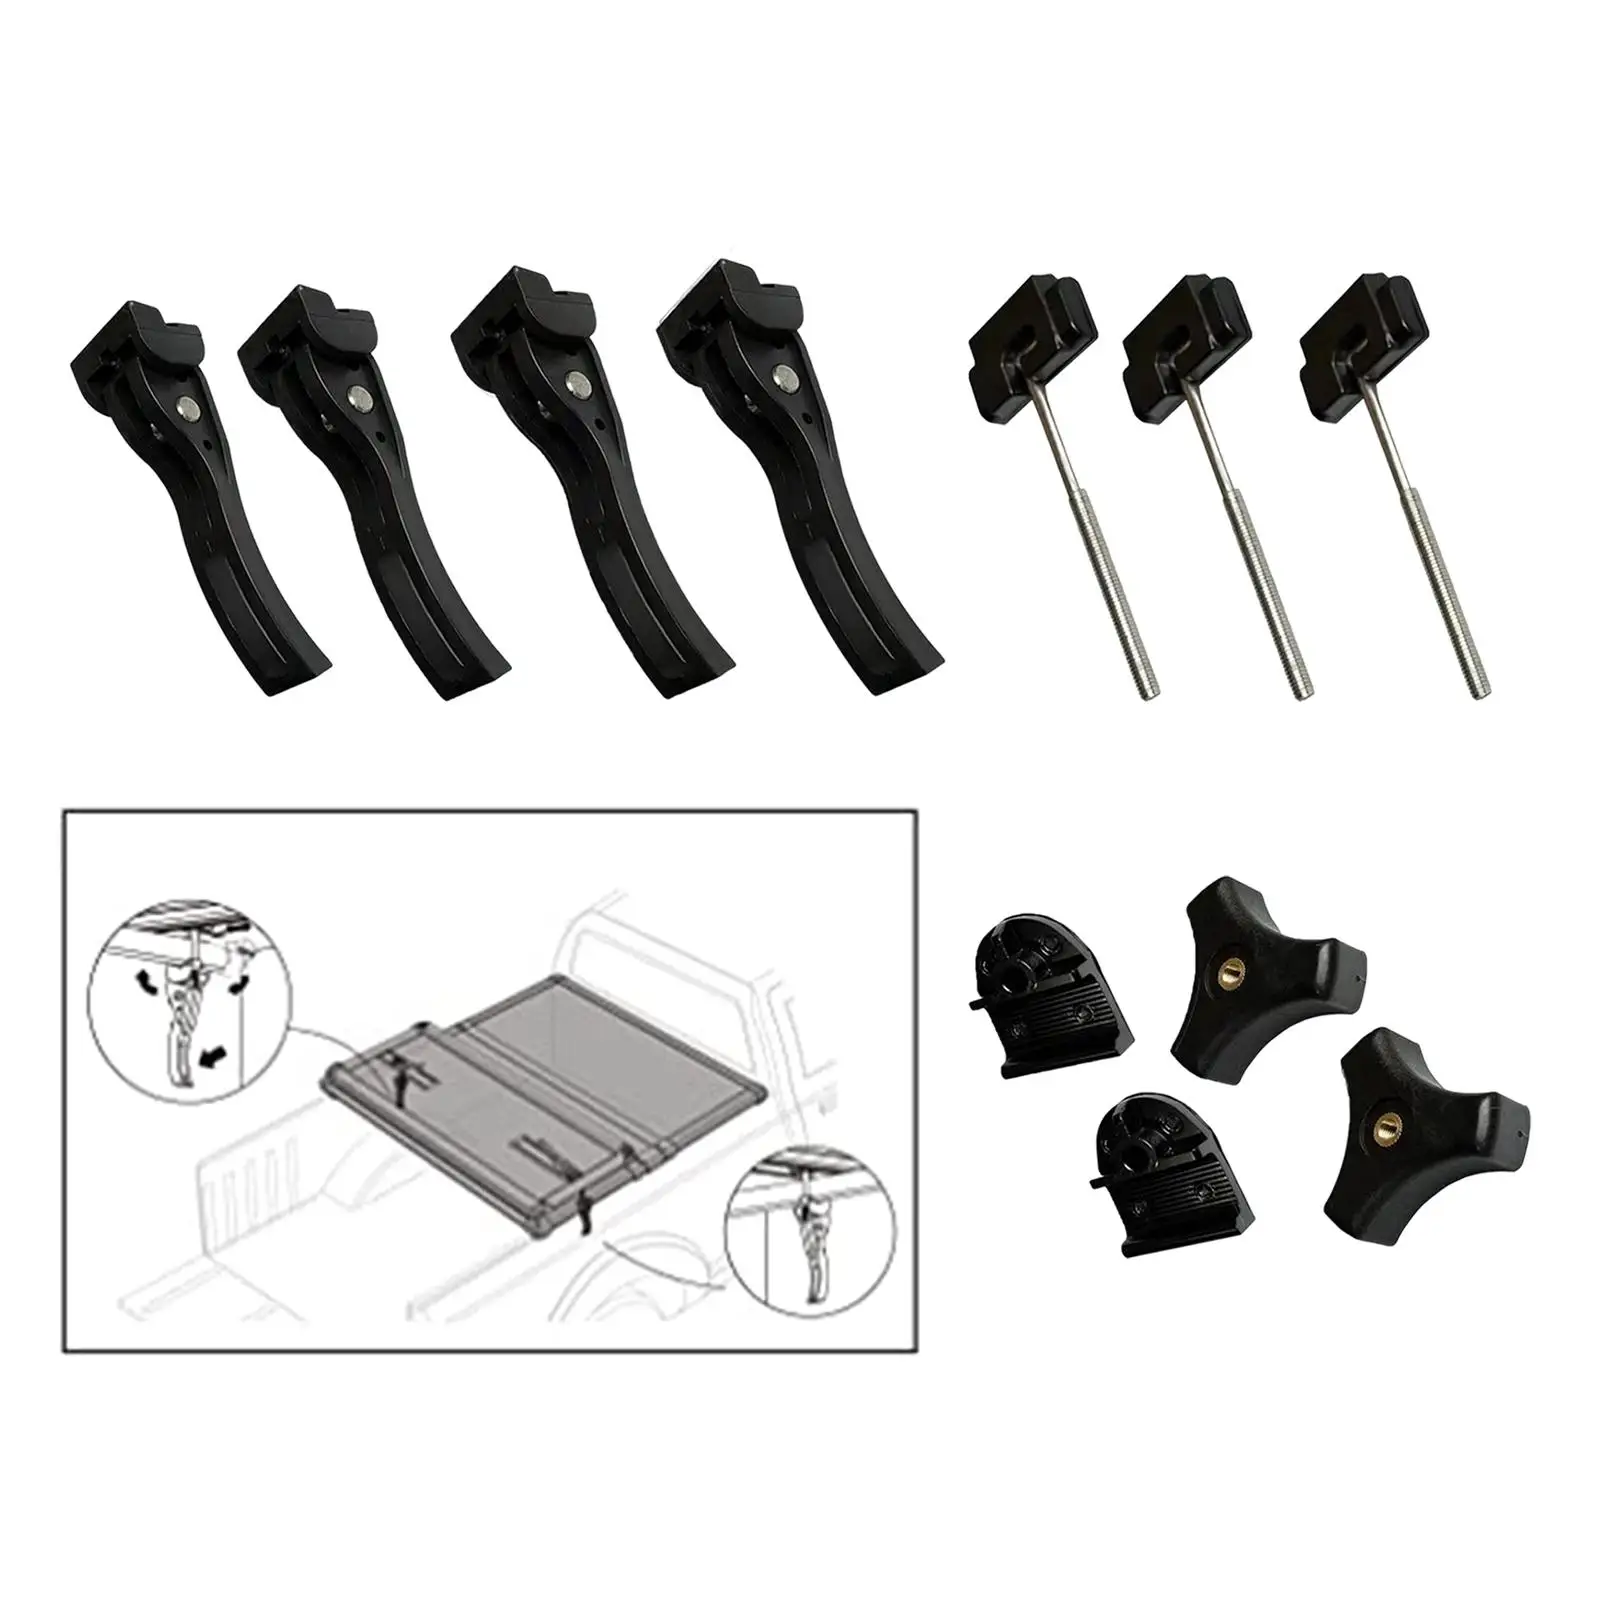 11 Pieces Replaces Bed Cover Fasteners Modification Spare Parts Screws Bolts Clamps for Feetuo Hard trifold Tonneau Cover